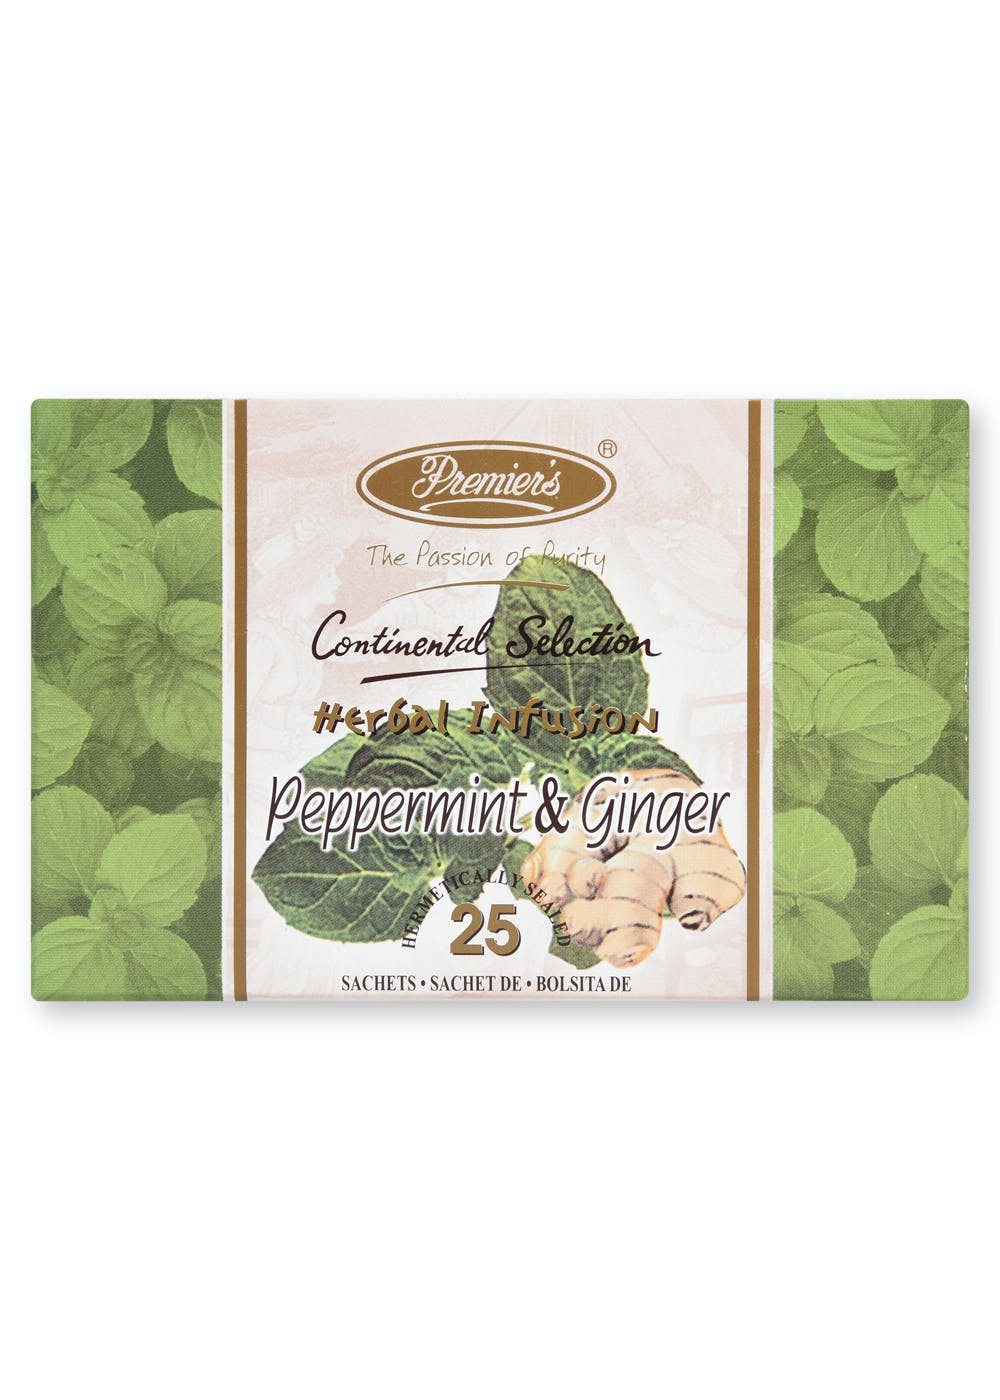 Peppermint & Ginger Herbal Infusion Tea (Tea Bags) - 37.5g